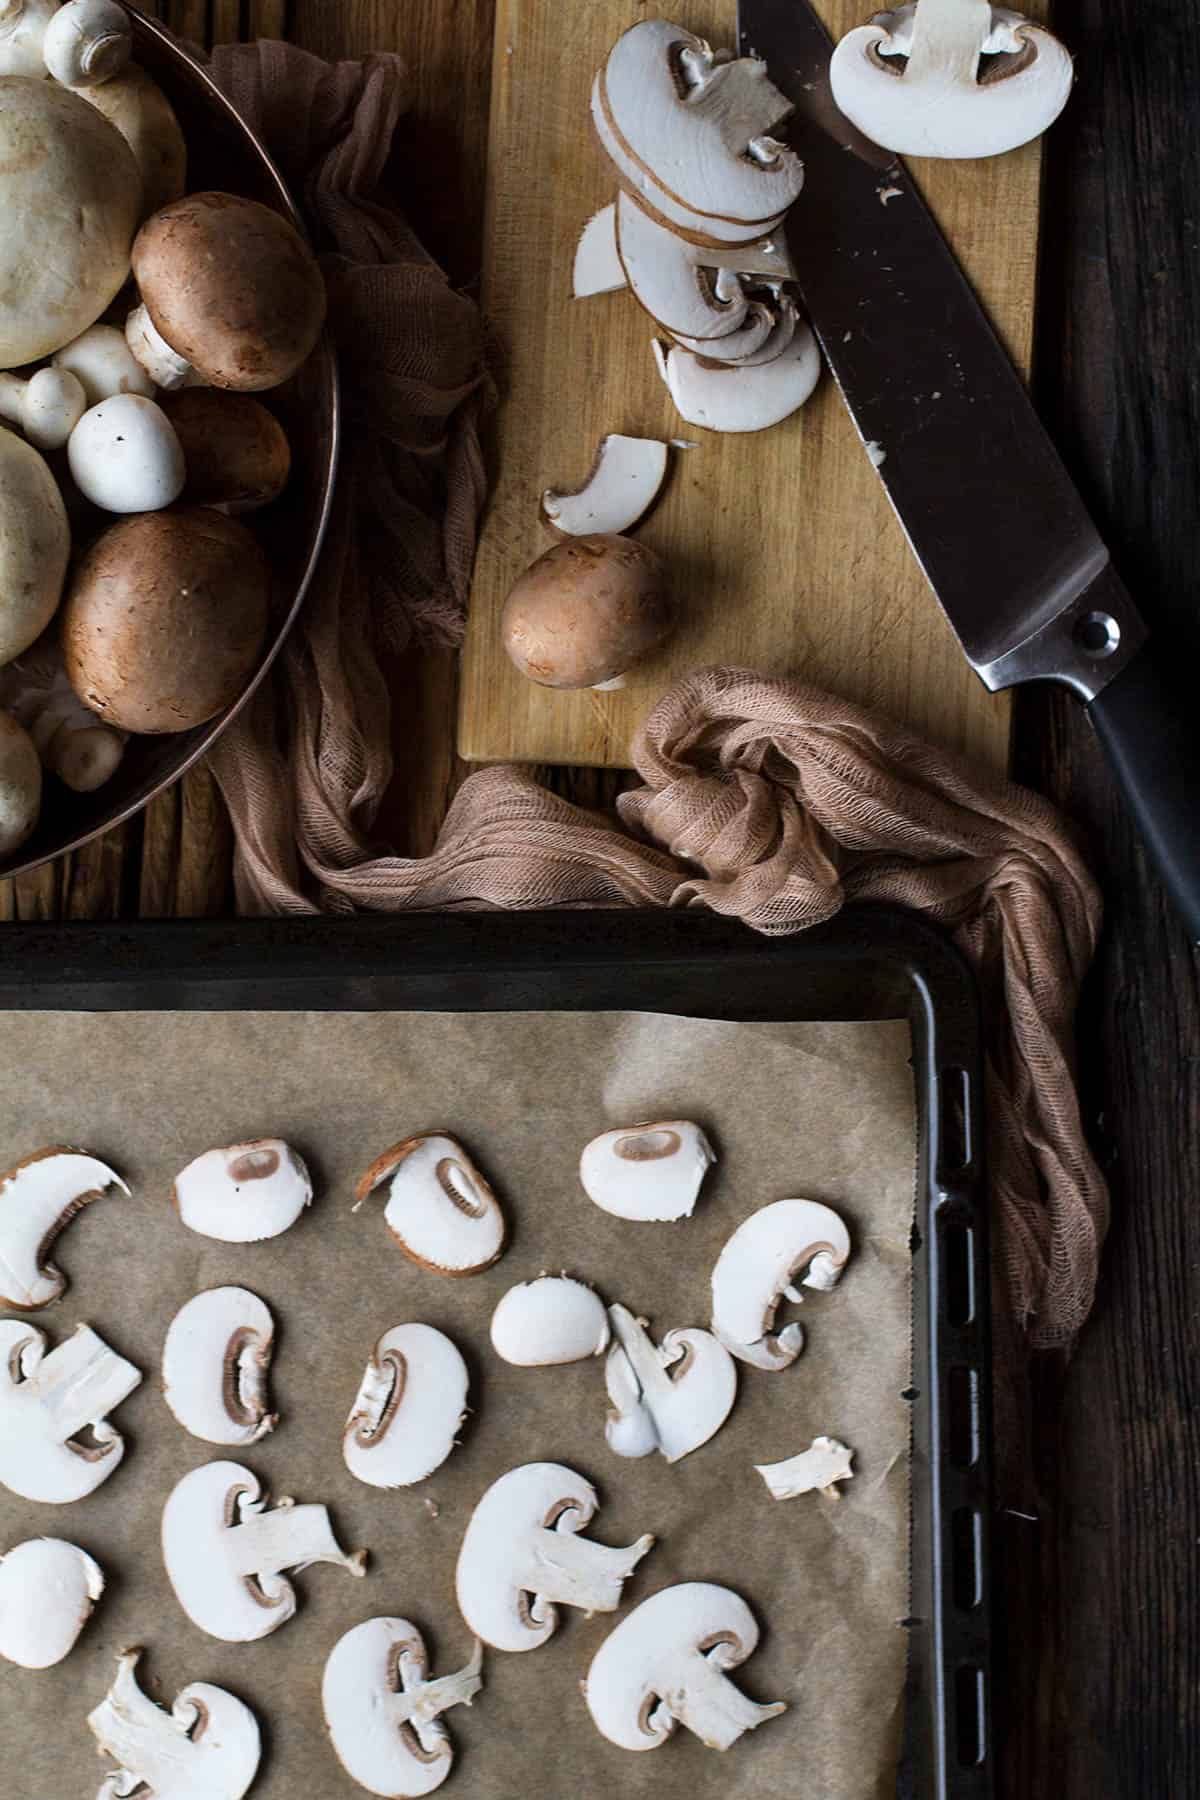 A baking sheet with sliced mushrooms.